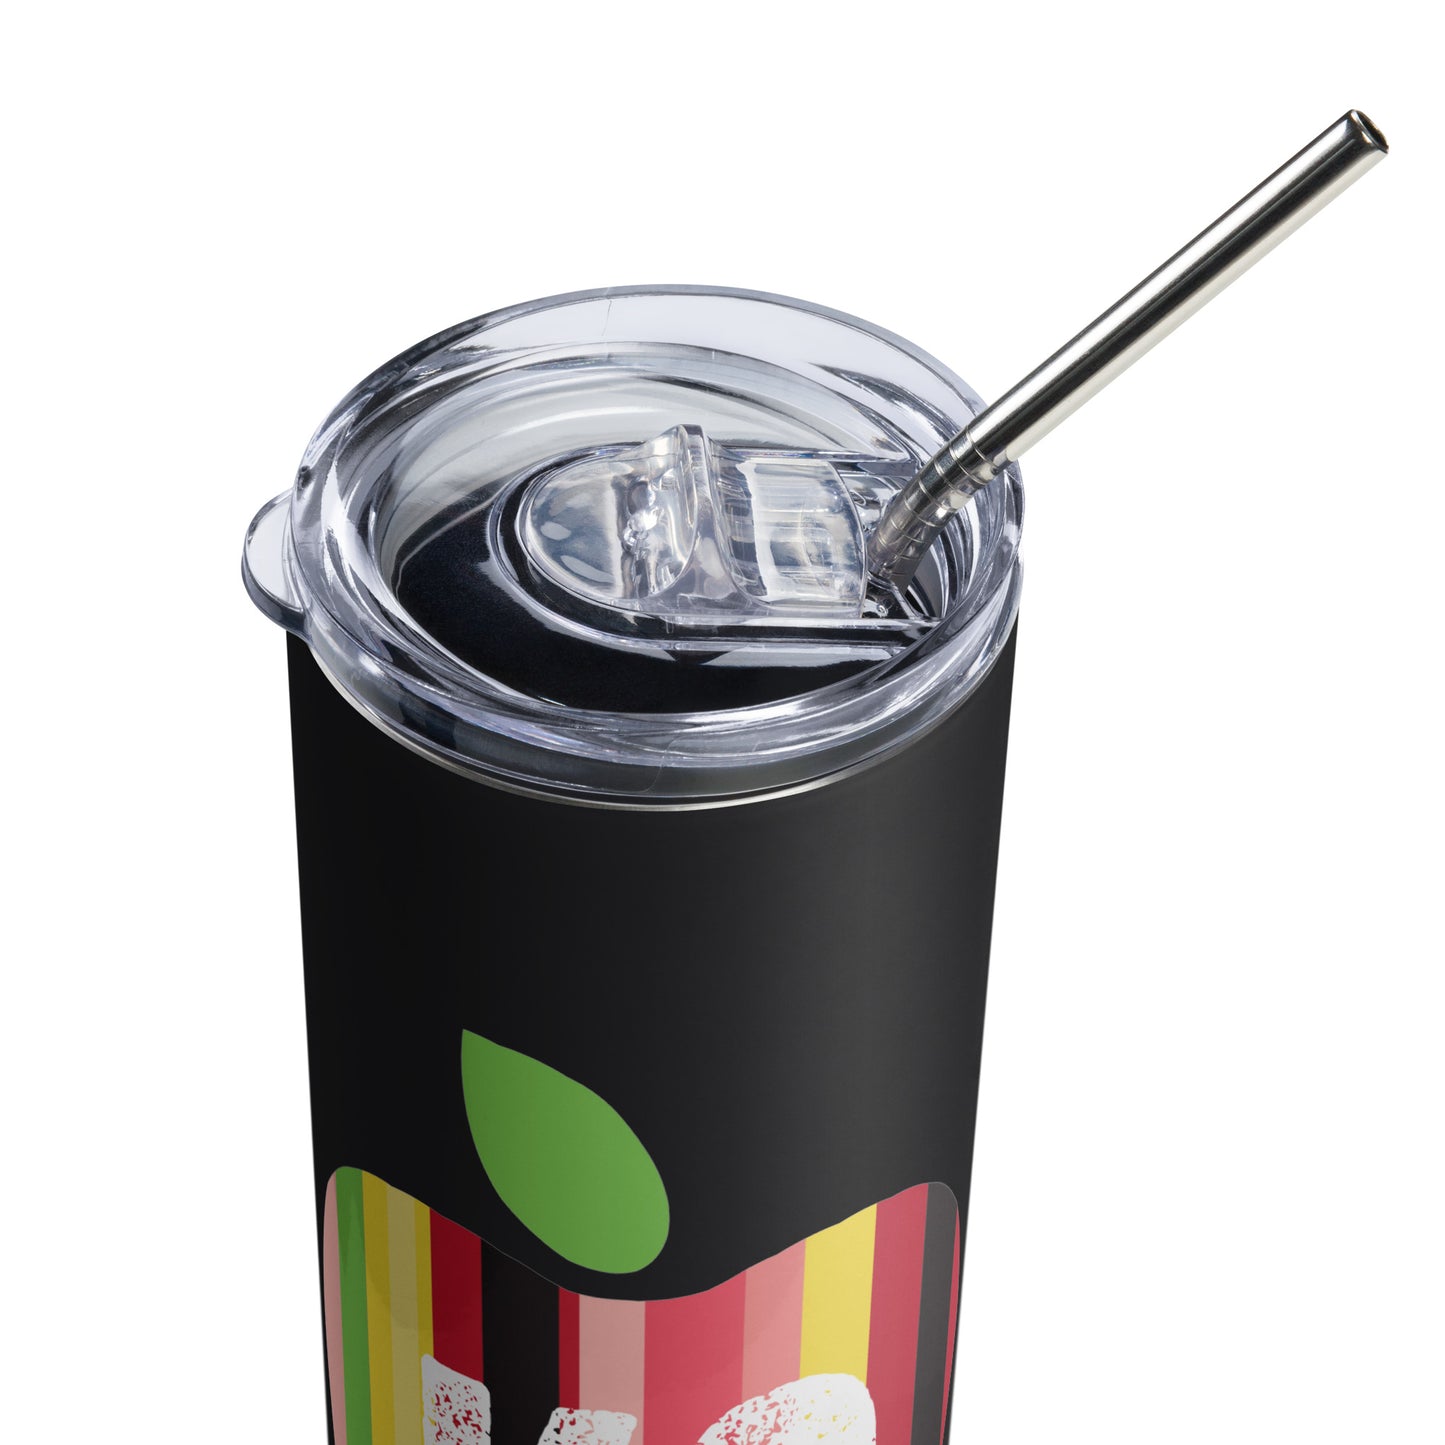 Show Me Apple Stainless steel tumbler